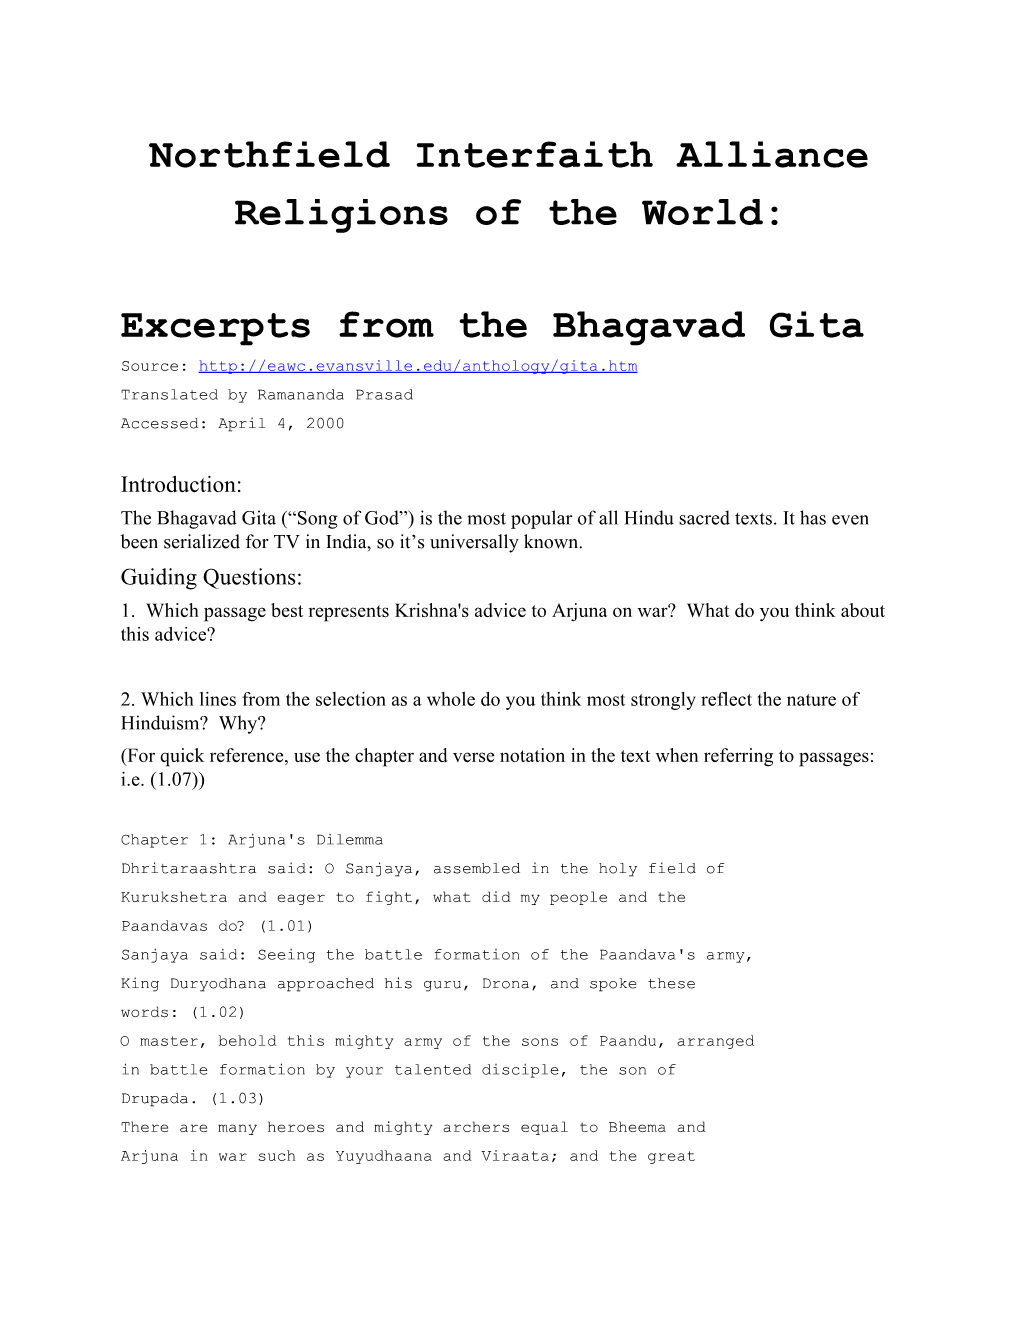 Excerpts from the Bhagavad Gita Source: ​ Translated by Ramananda Prasad Accessed: April 4, 2000